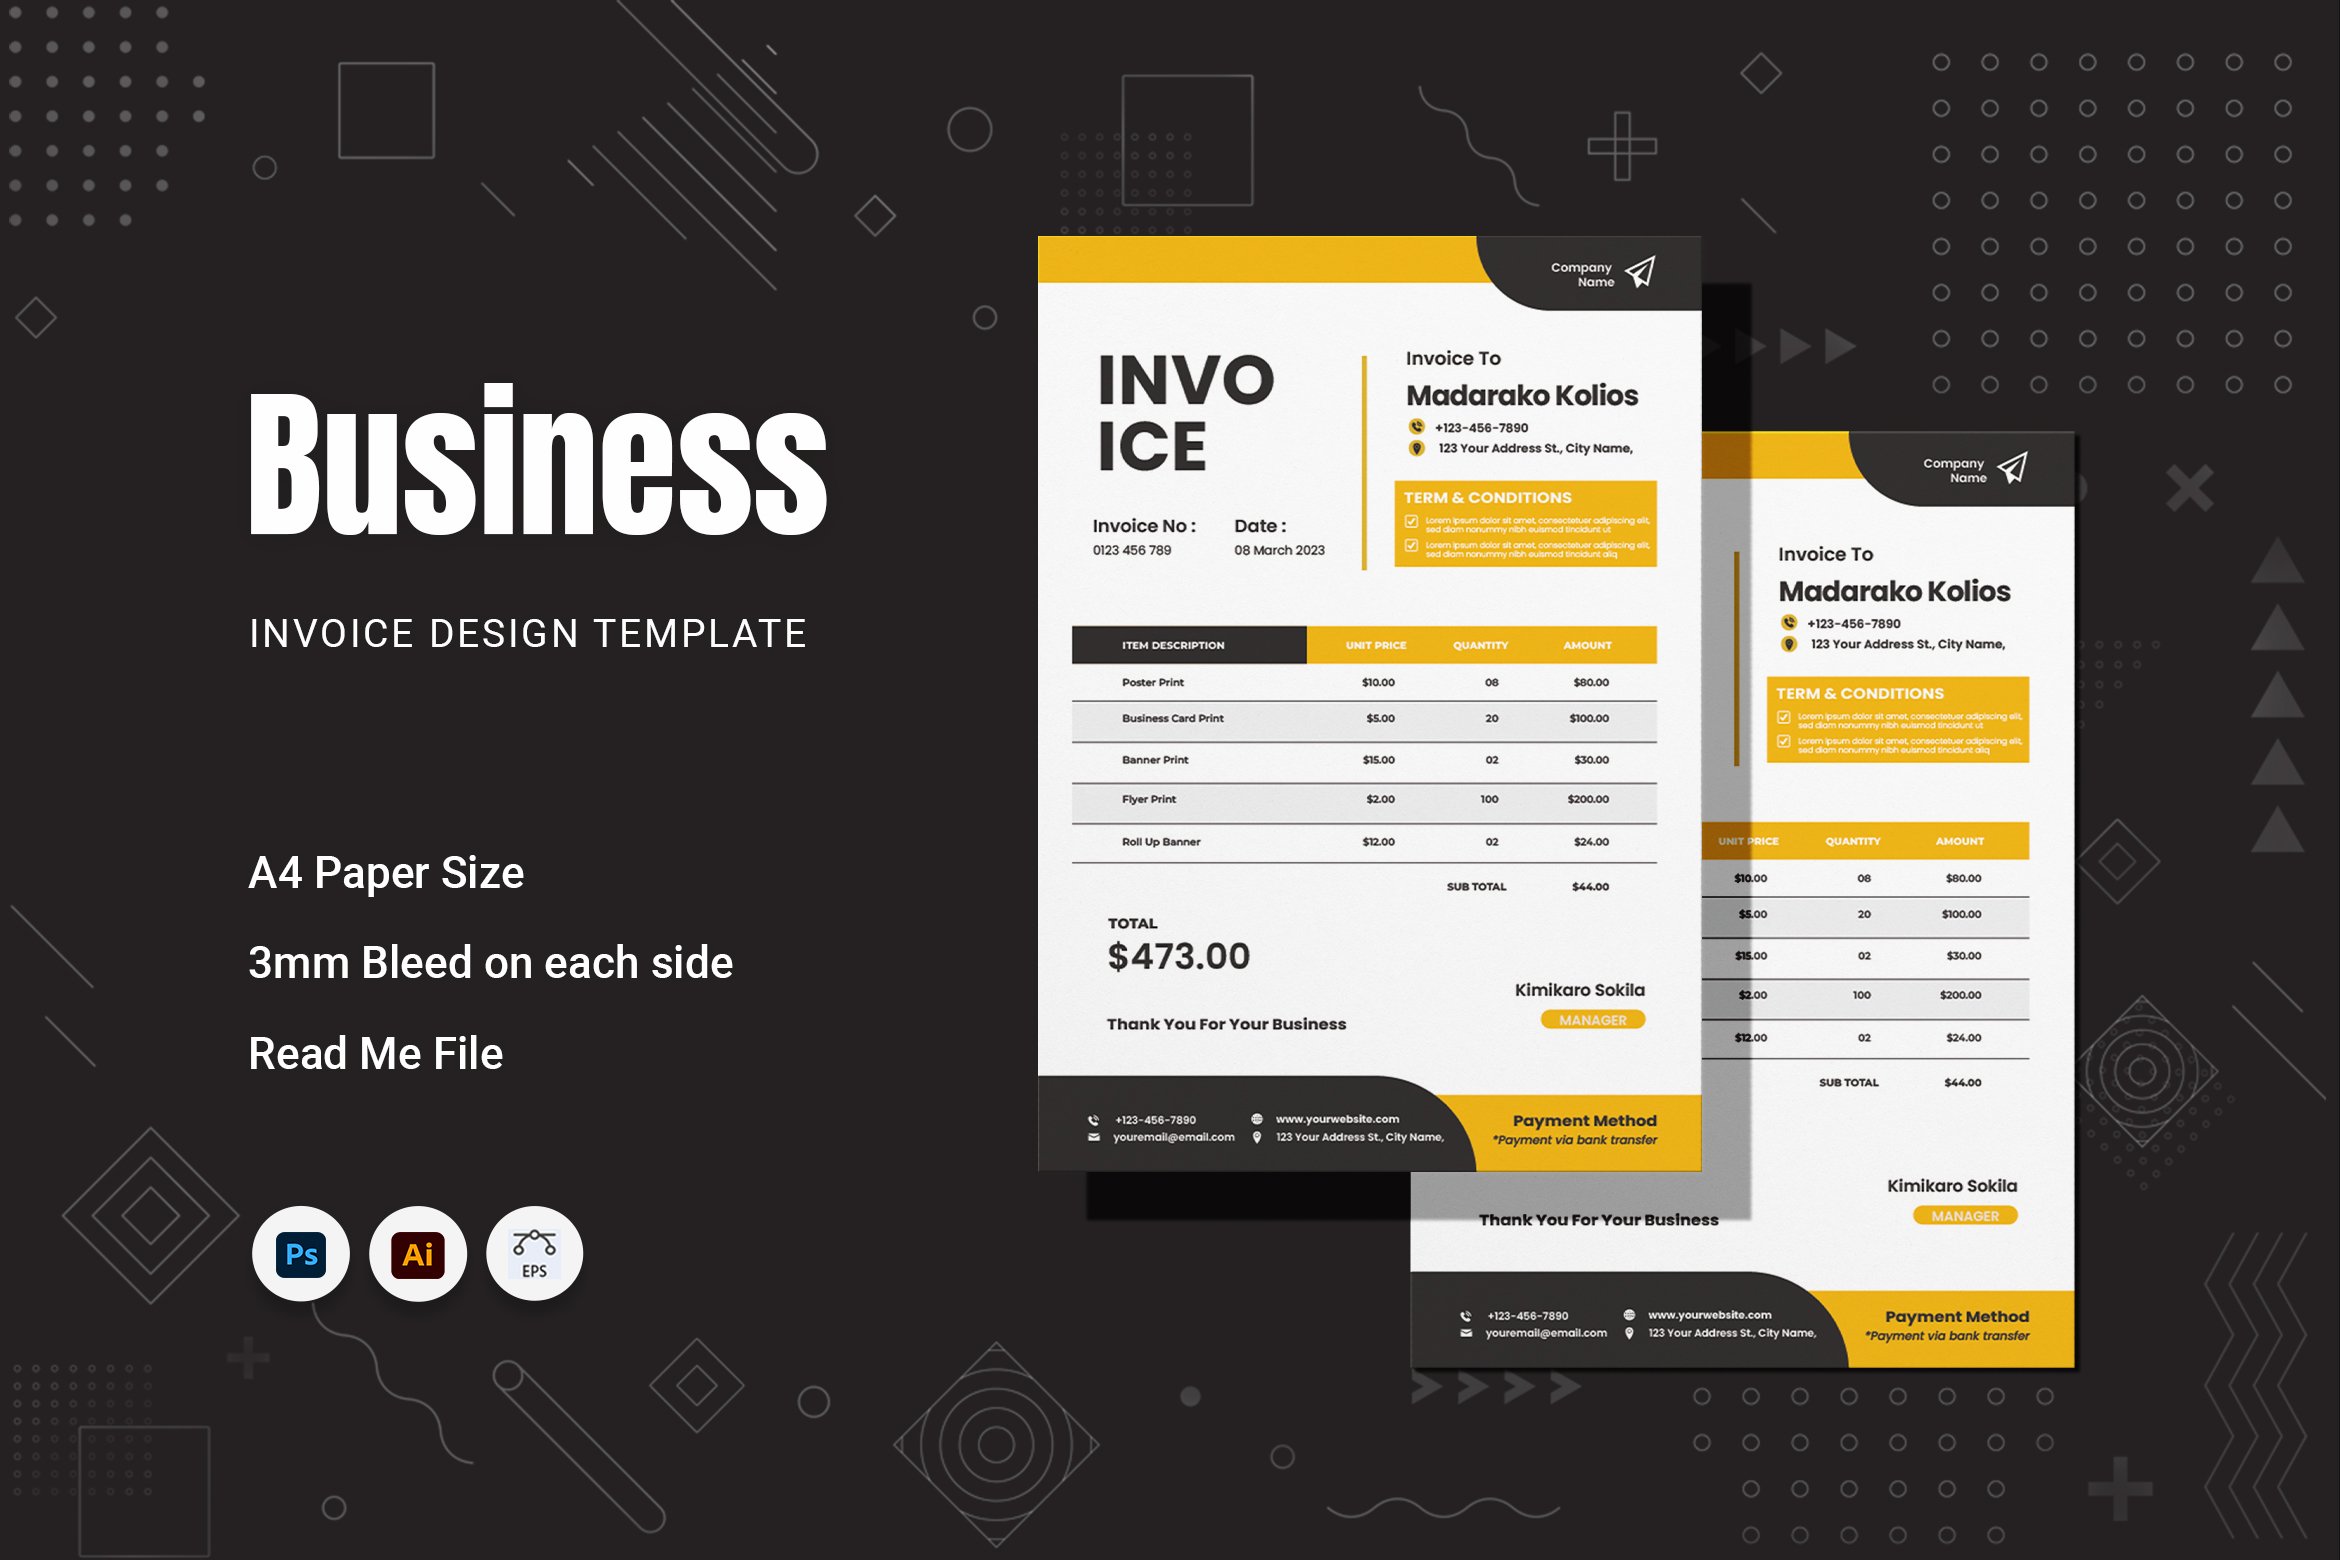 Business Invoice cover image.